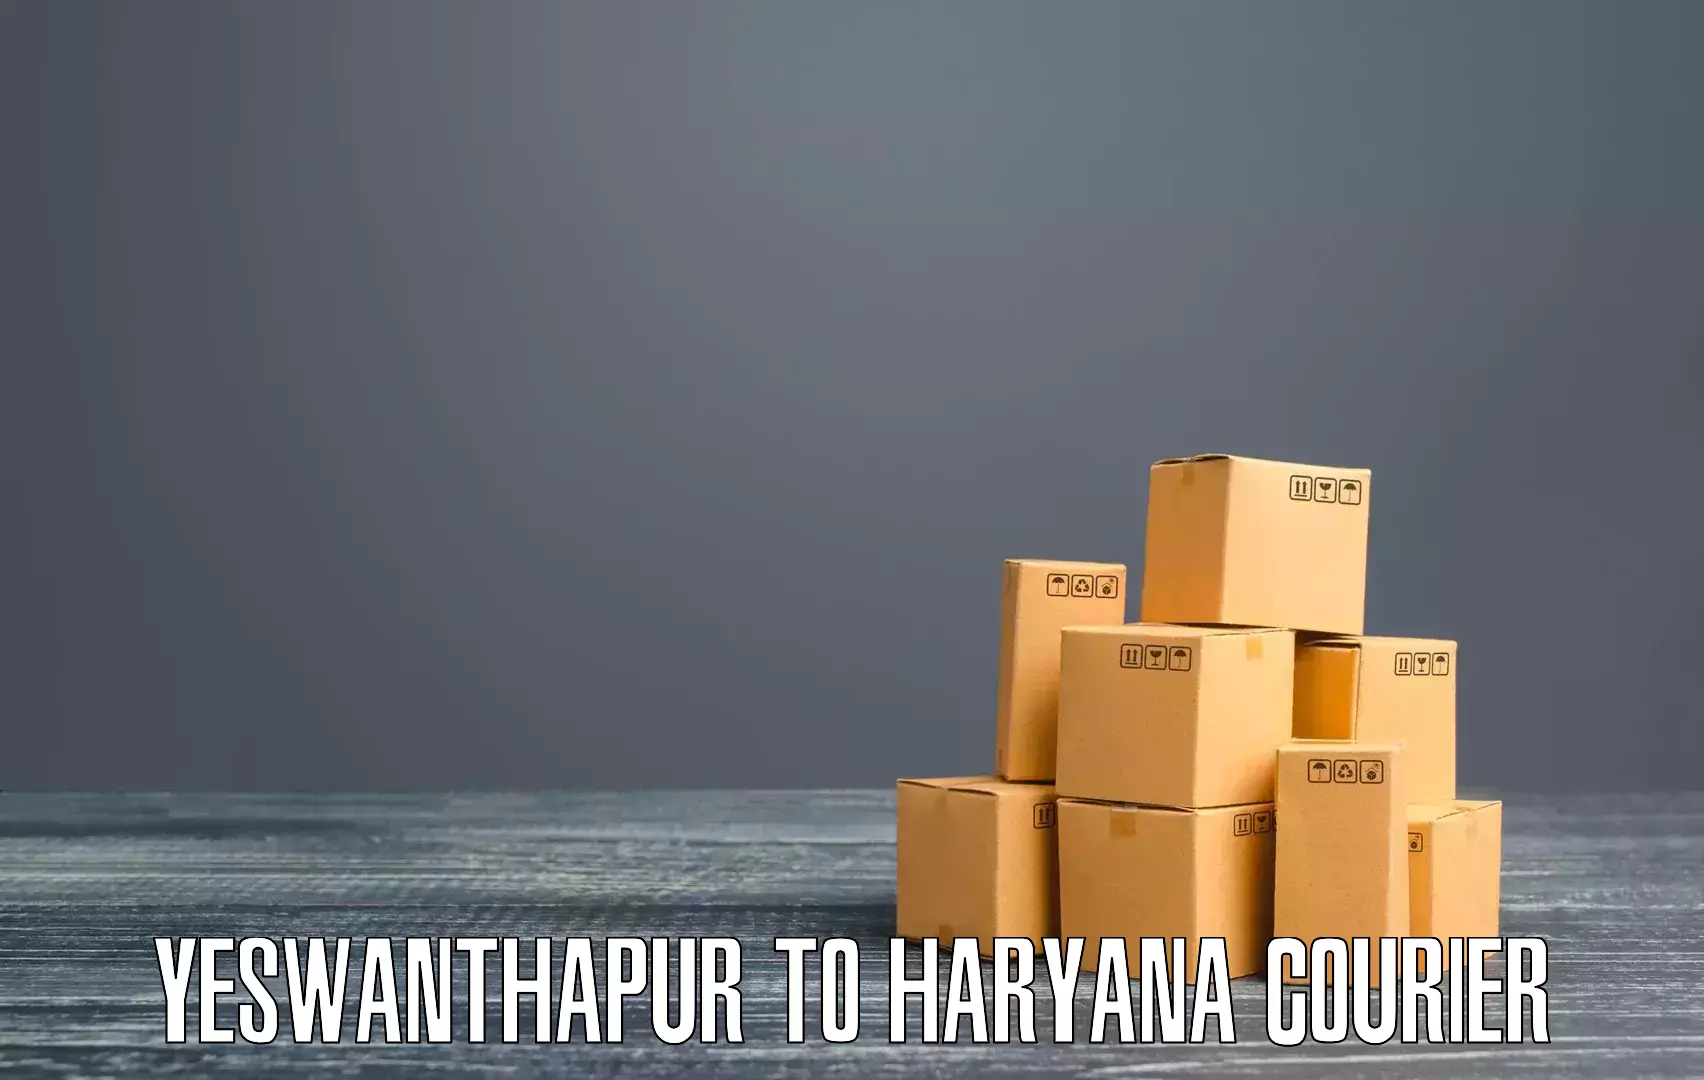 Enhanced shipping experience Yeswanthapur to Karnal